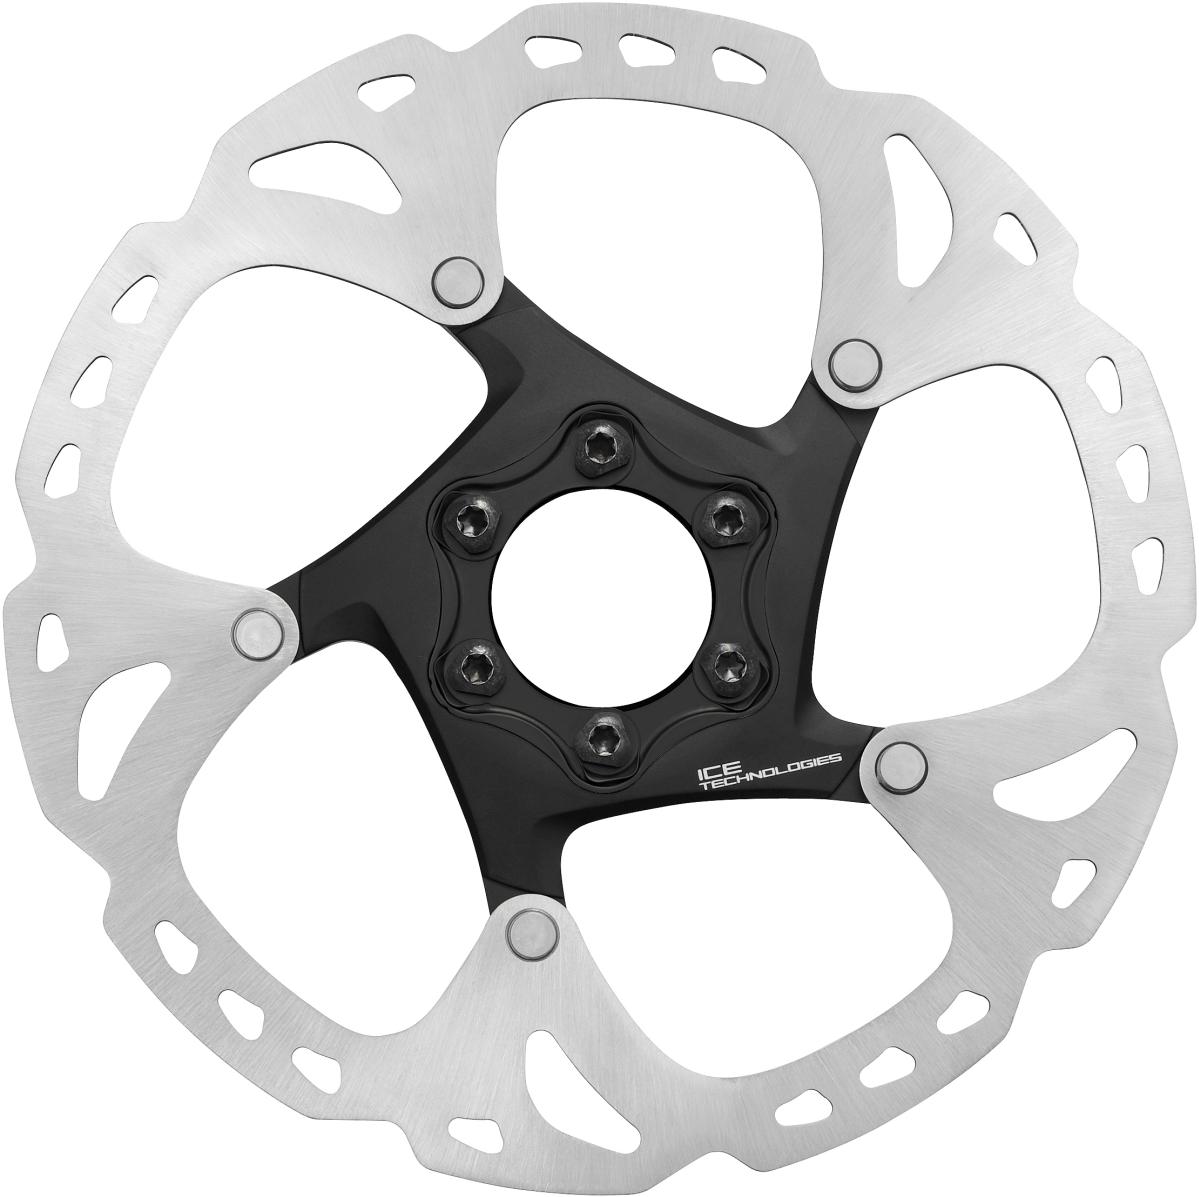 SHIMANO ROTOR FOR DISC BRAKE, SM-RT86, M 180MM, 6-BOLT TYPE, IND.PACK